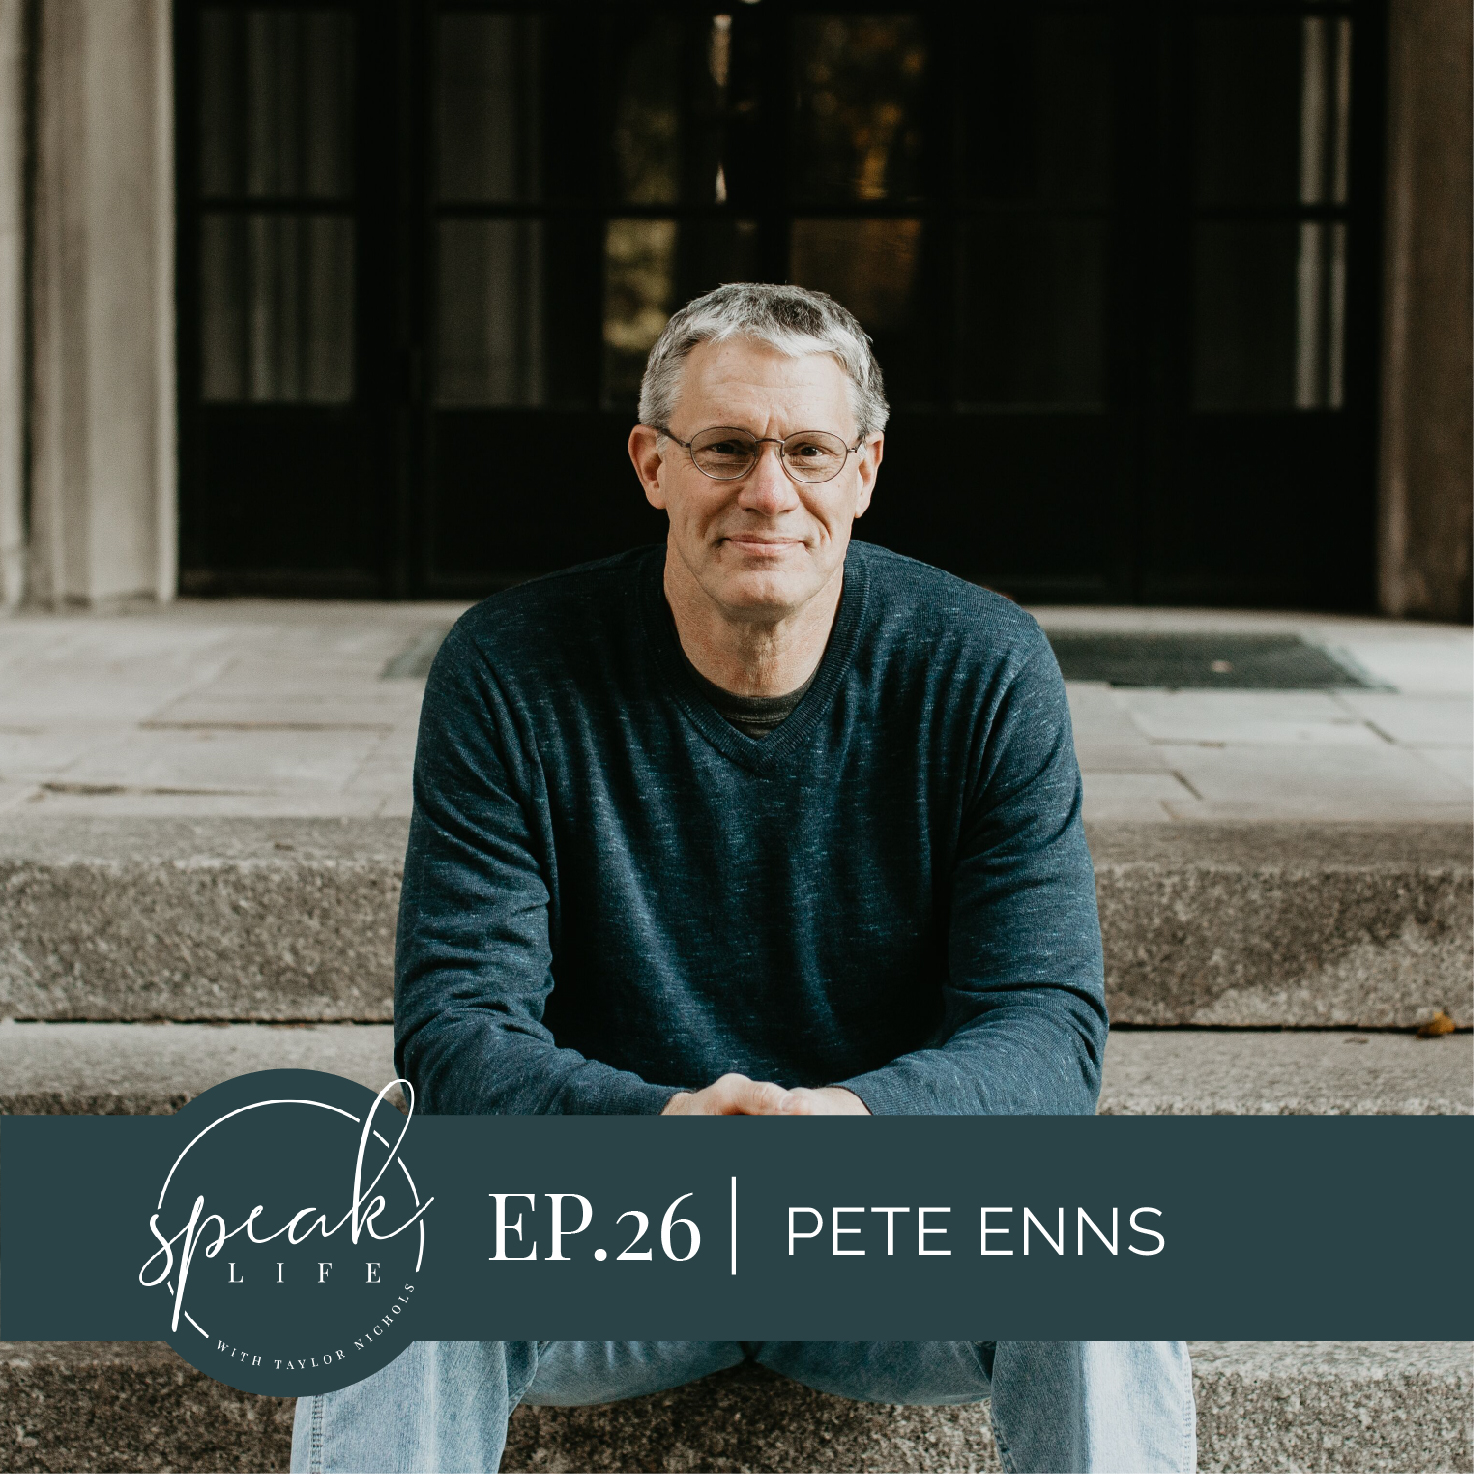 Episode 26. Pete Enns – From “her pain” to “his healing”